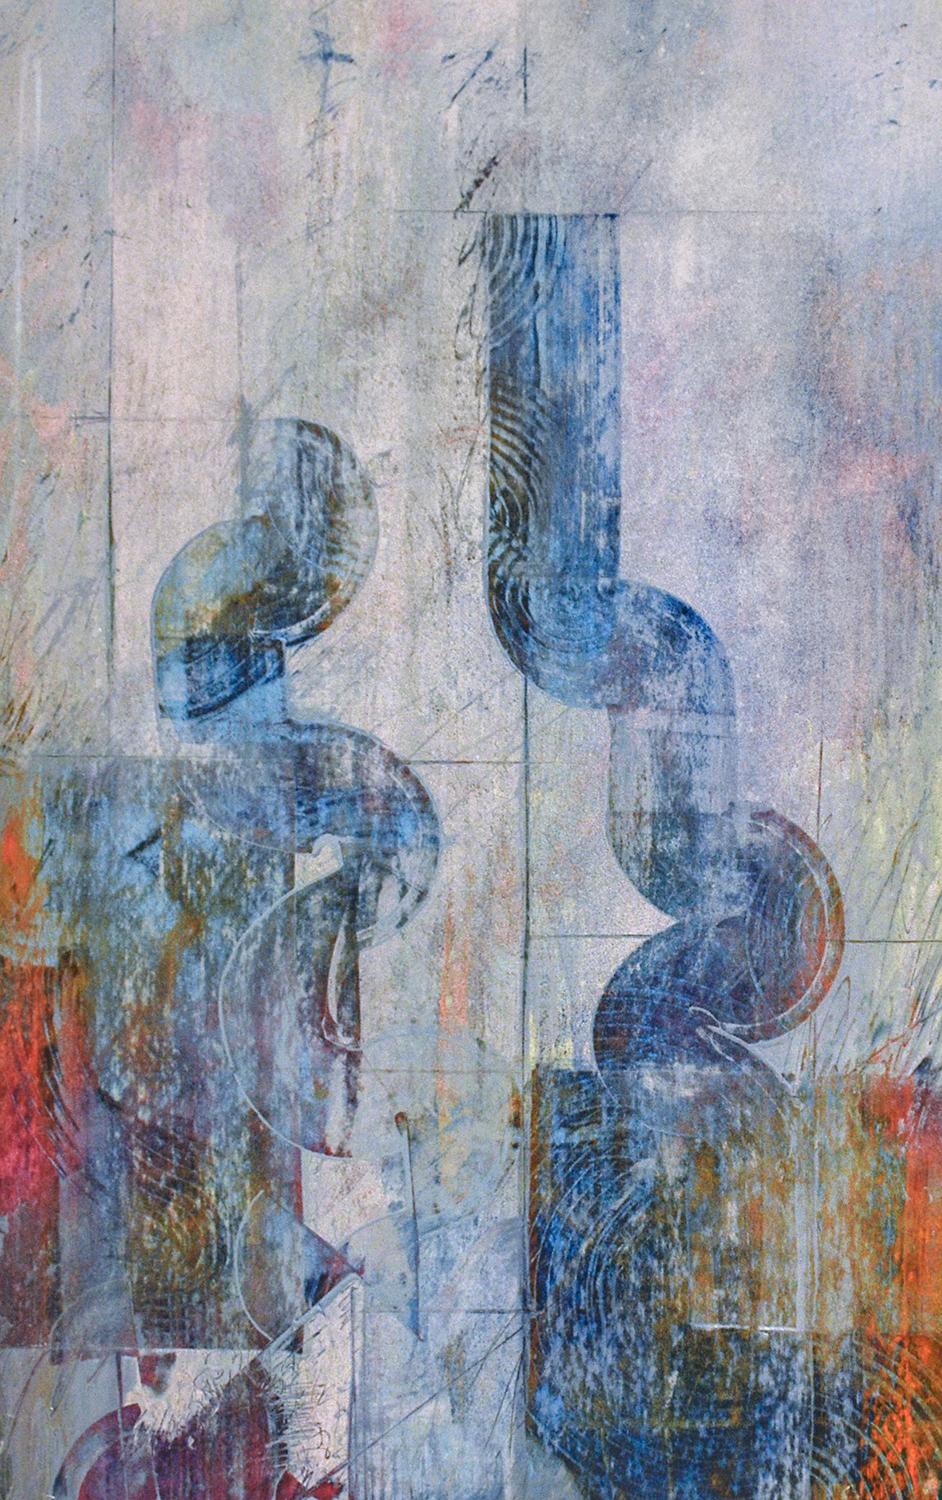 Conversation Between Marks (Abstract Metallic Expressionist Painting in Blue)